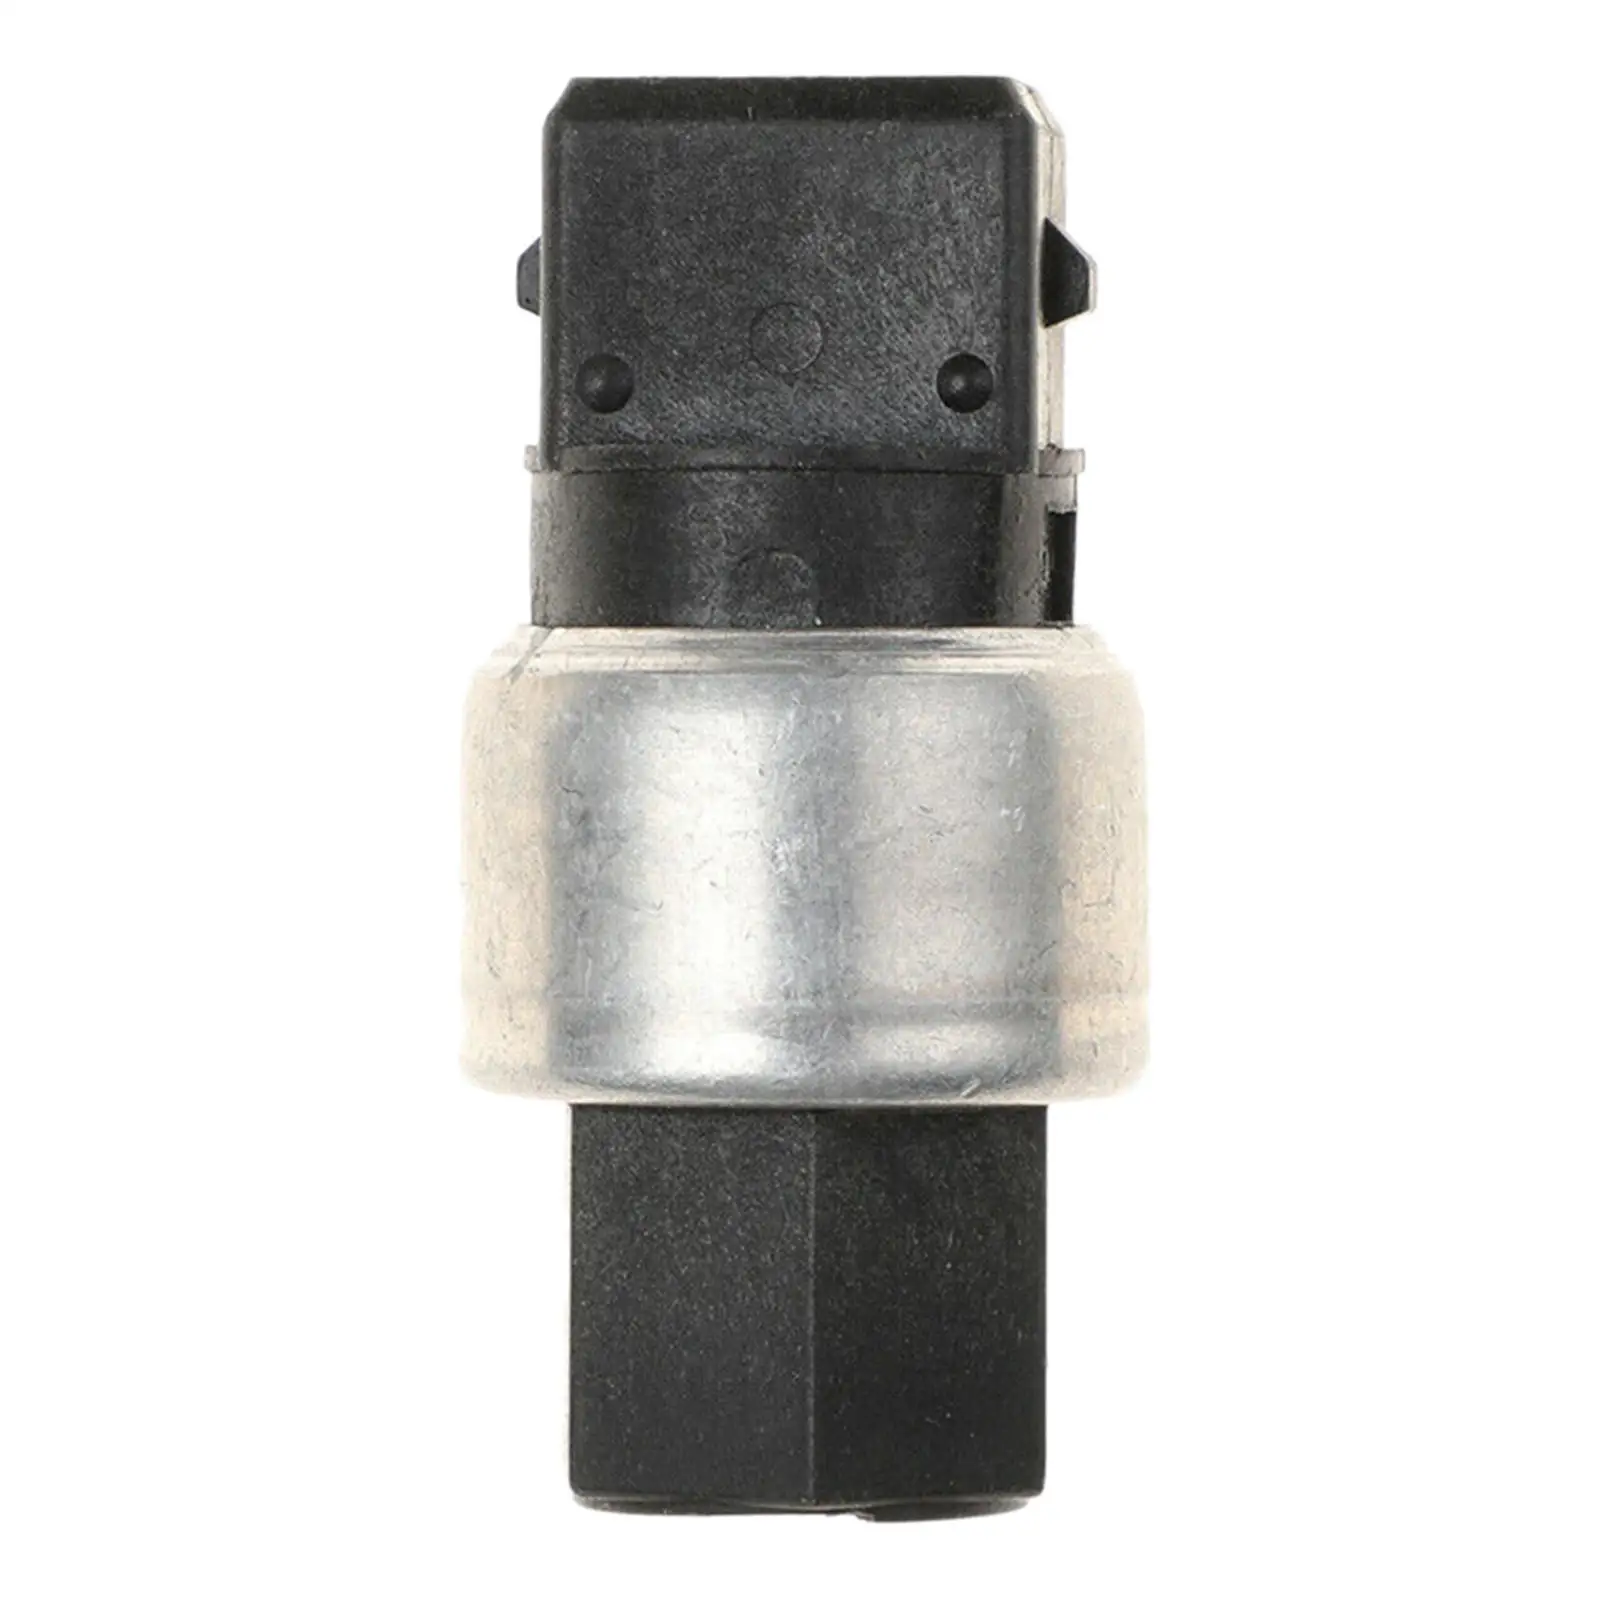 Air Conditioning Pressure Switch Air Pressure Switch for Volvo C30 Parts Replace 30780427 Accessories